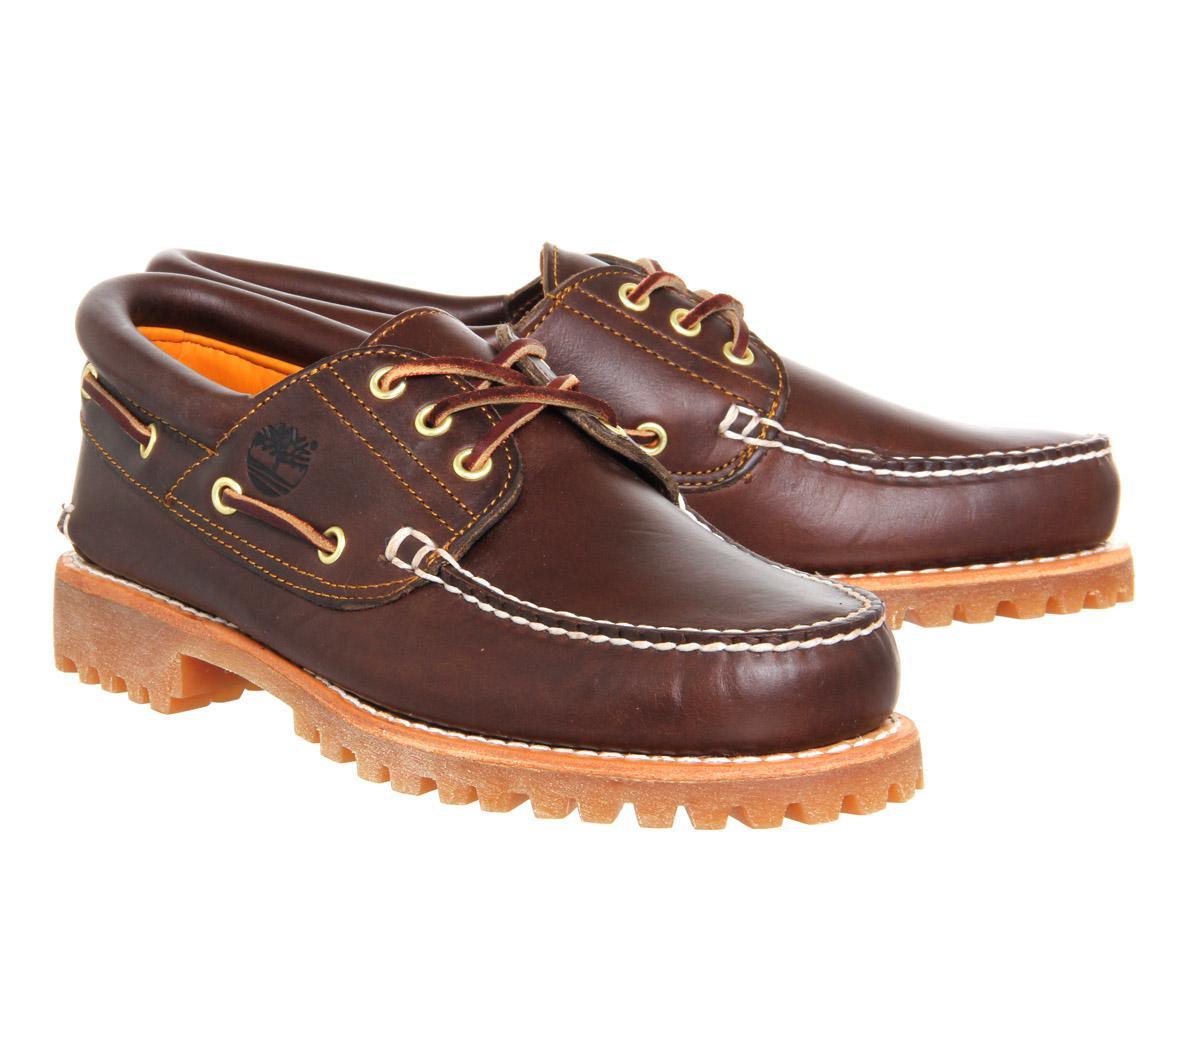 Timberland Cleated Boat Shoe in Brown for Men - Lyst